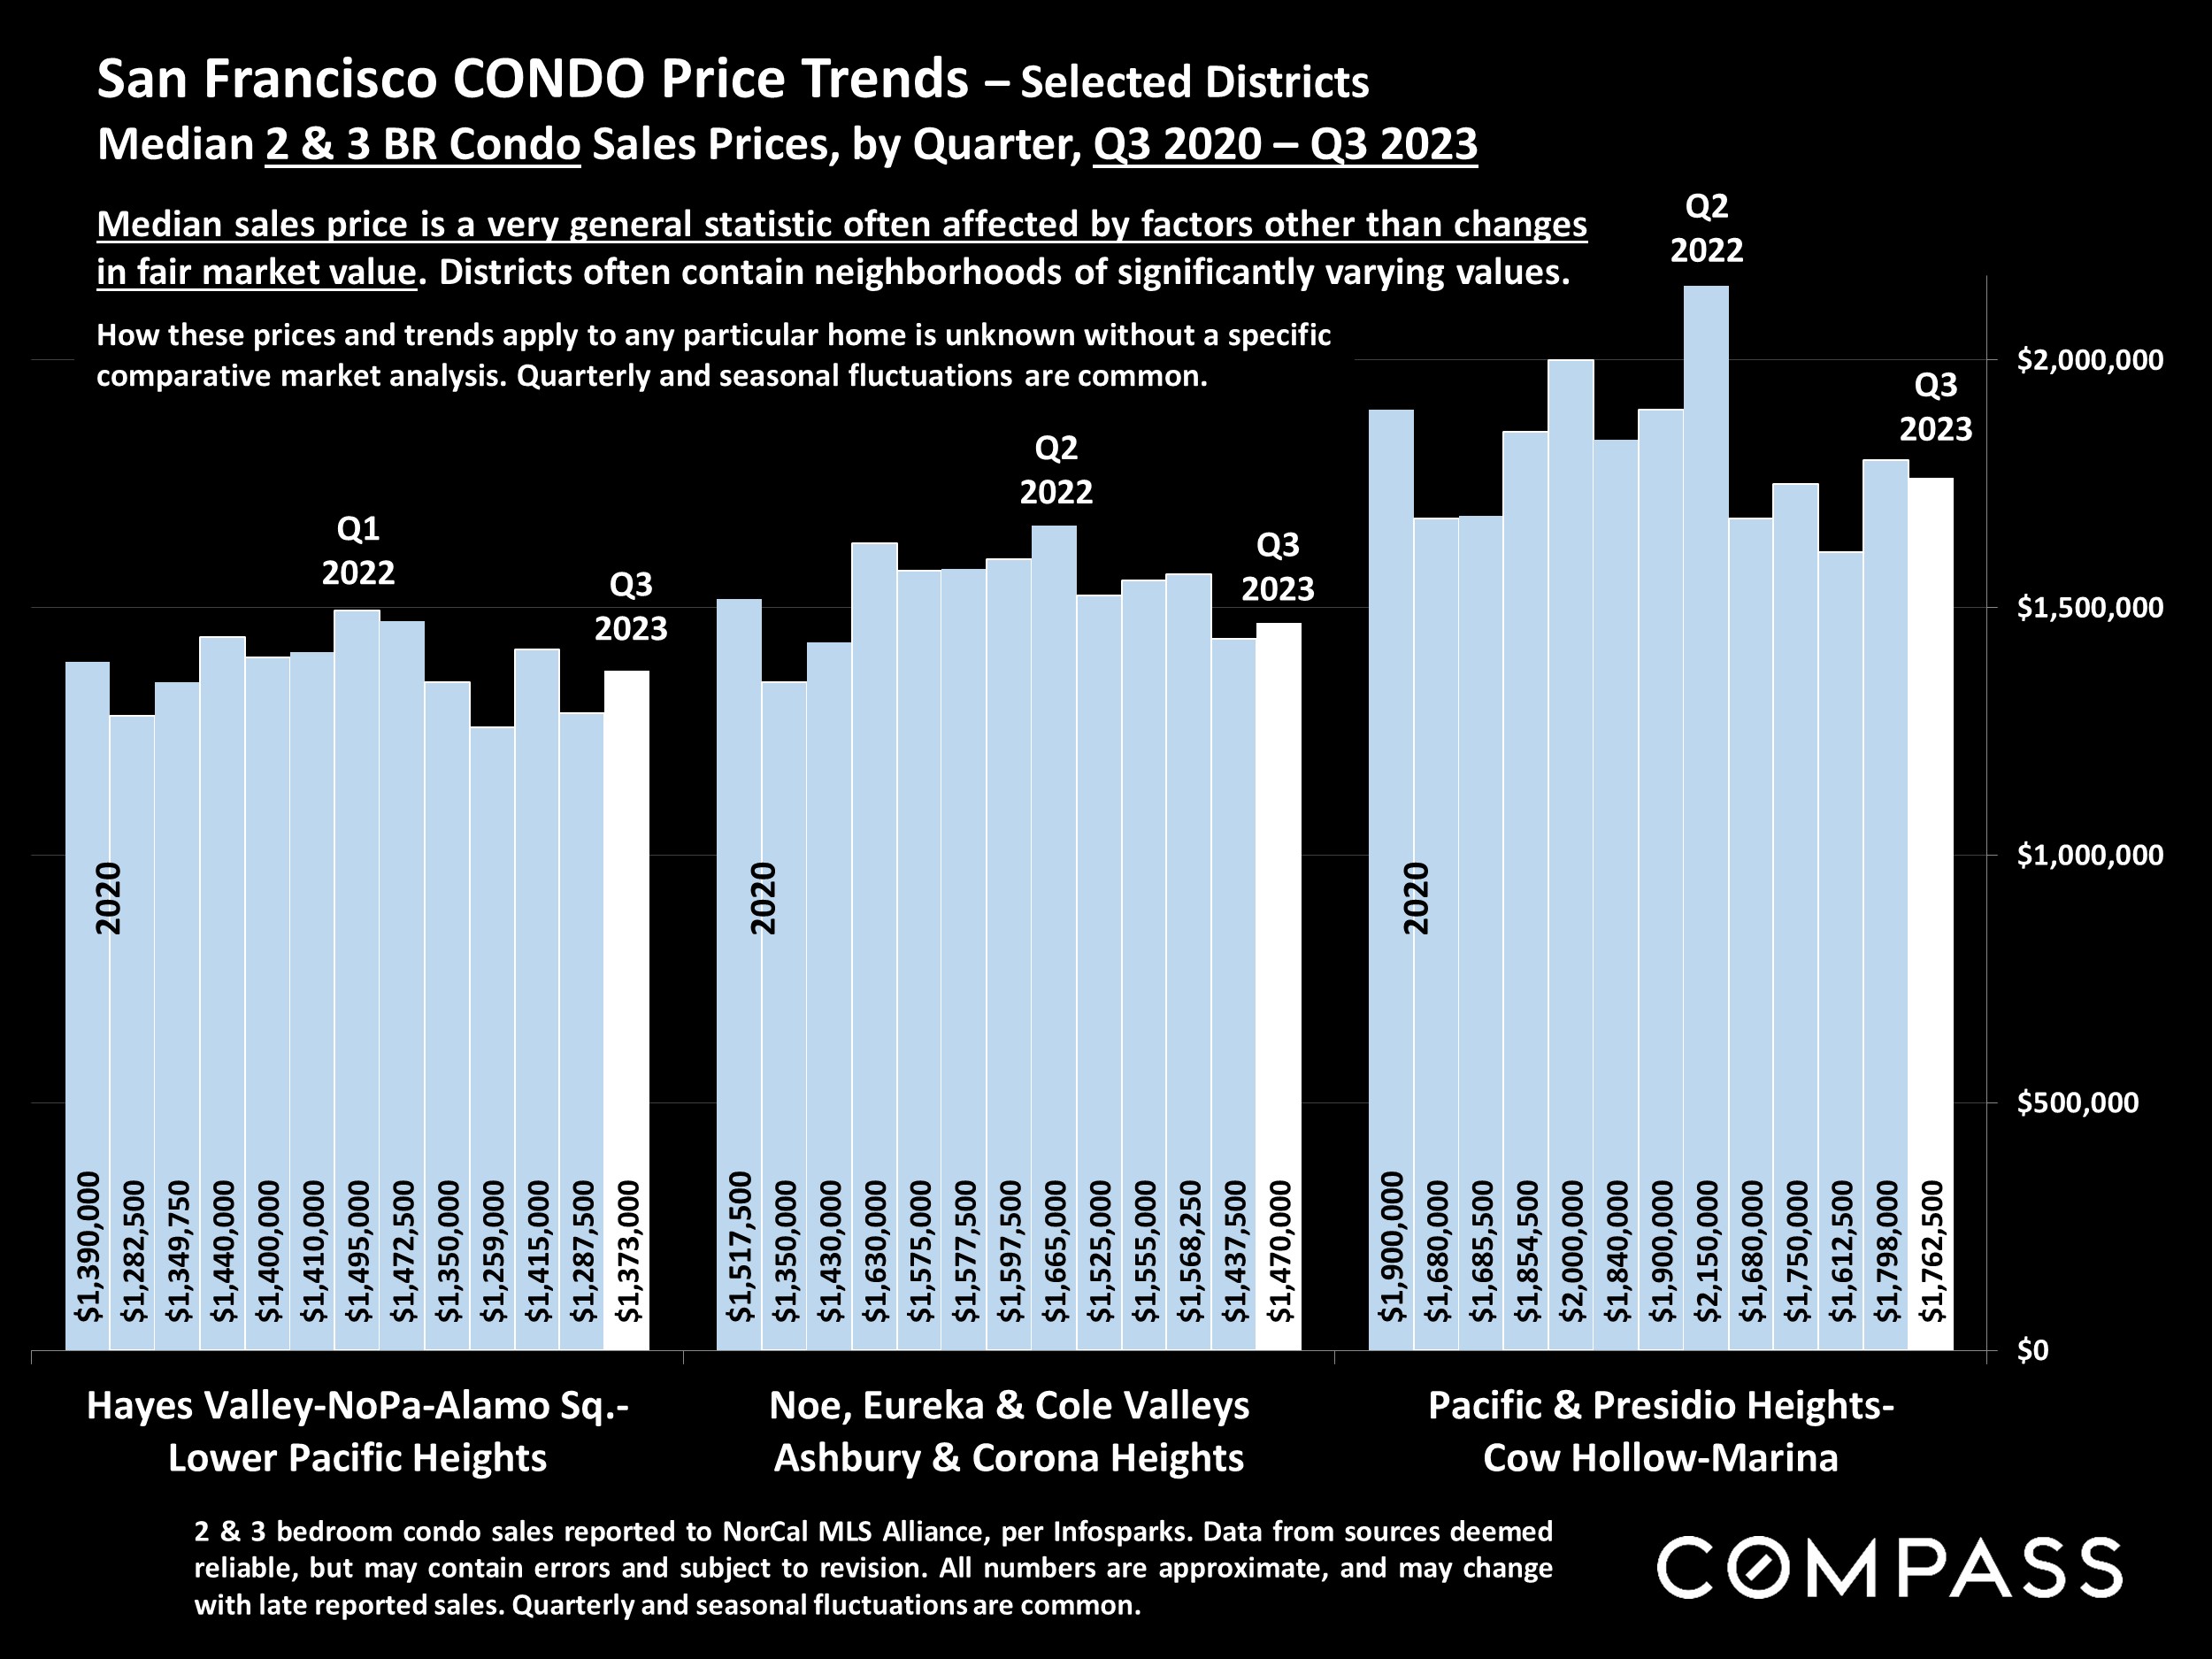 San Francisco CONDO Price Trends - Selected Districts.Median 2 & 3 BR Condo Sales Prices, by Quarter, Q3 2020 - Q3 2023